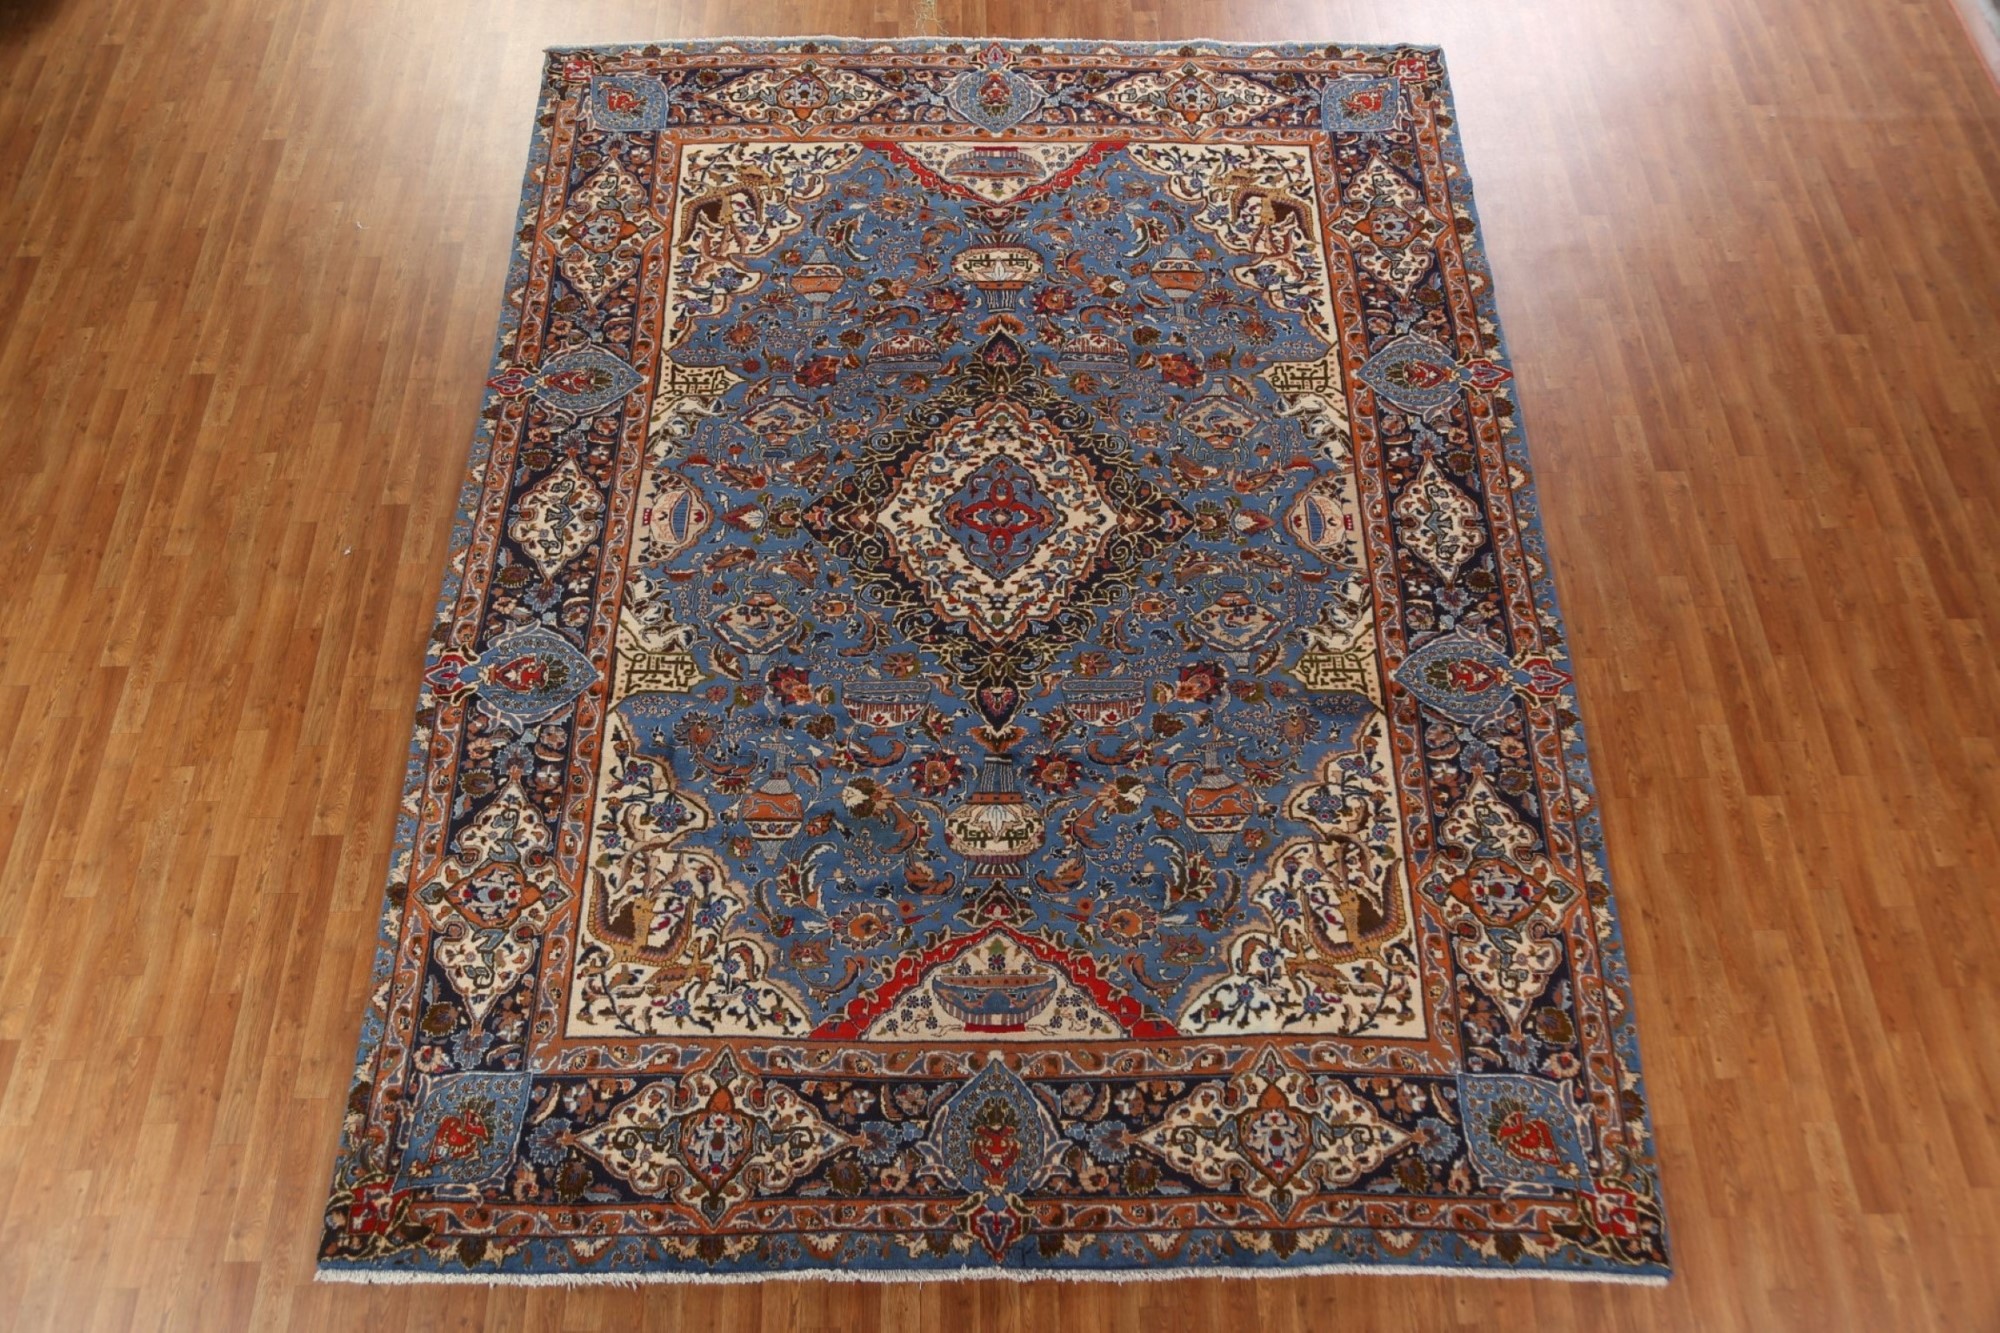 Hand Knotted Pictorial Wool & Silk Persian Rug 2x4 Blue Isfahan 